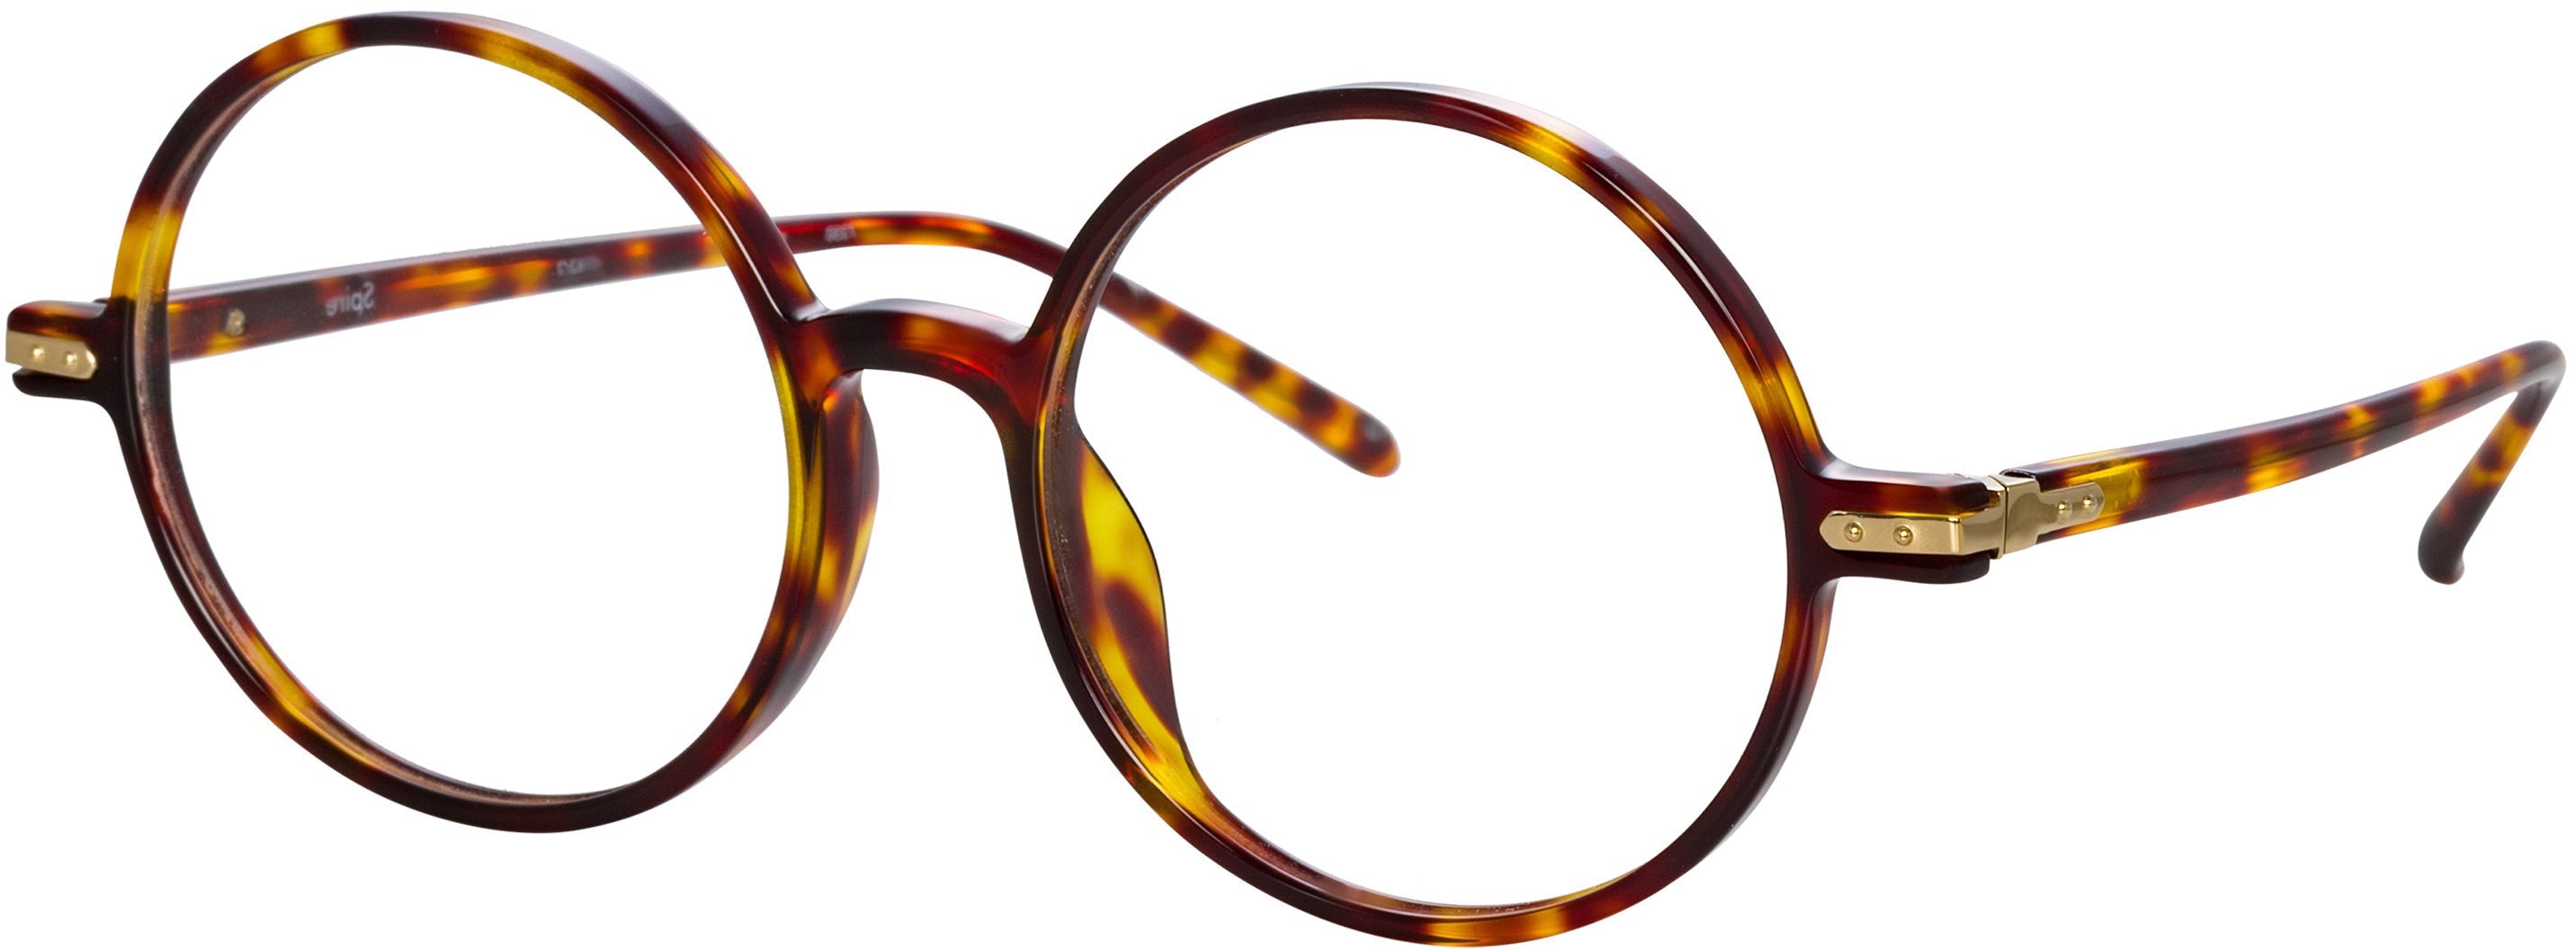 Color_LF62C2OPT - Spire Round Optical Frame in Tortoiseshell